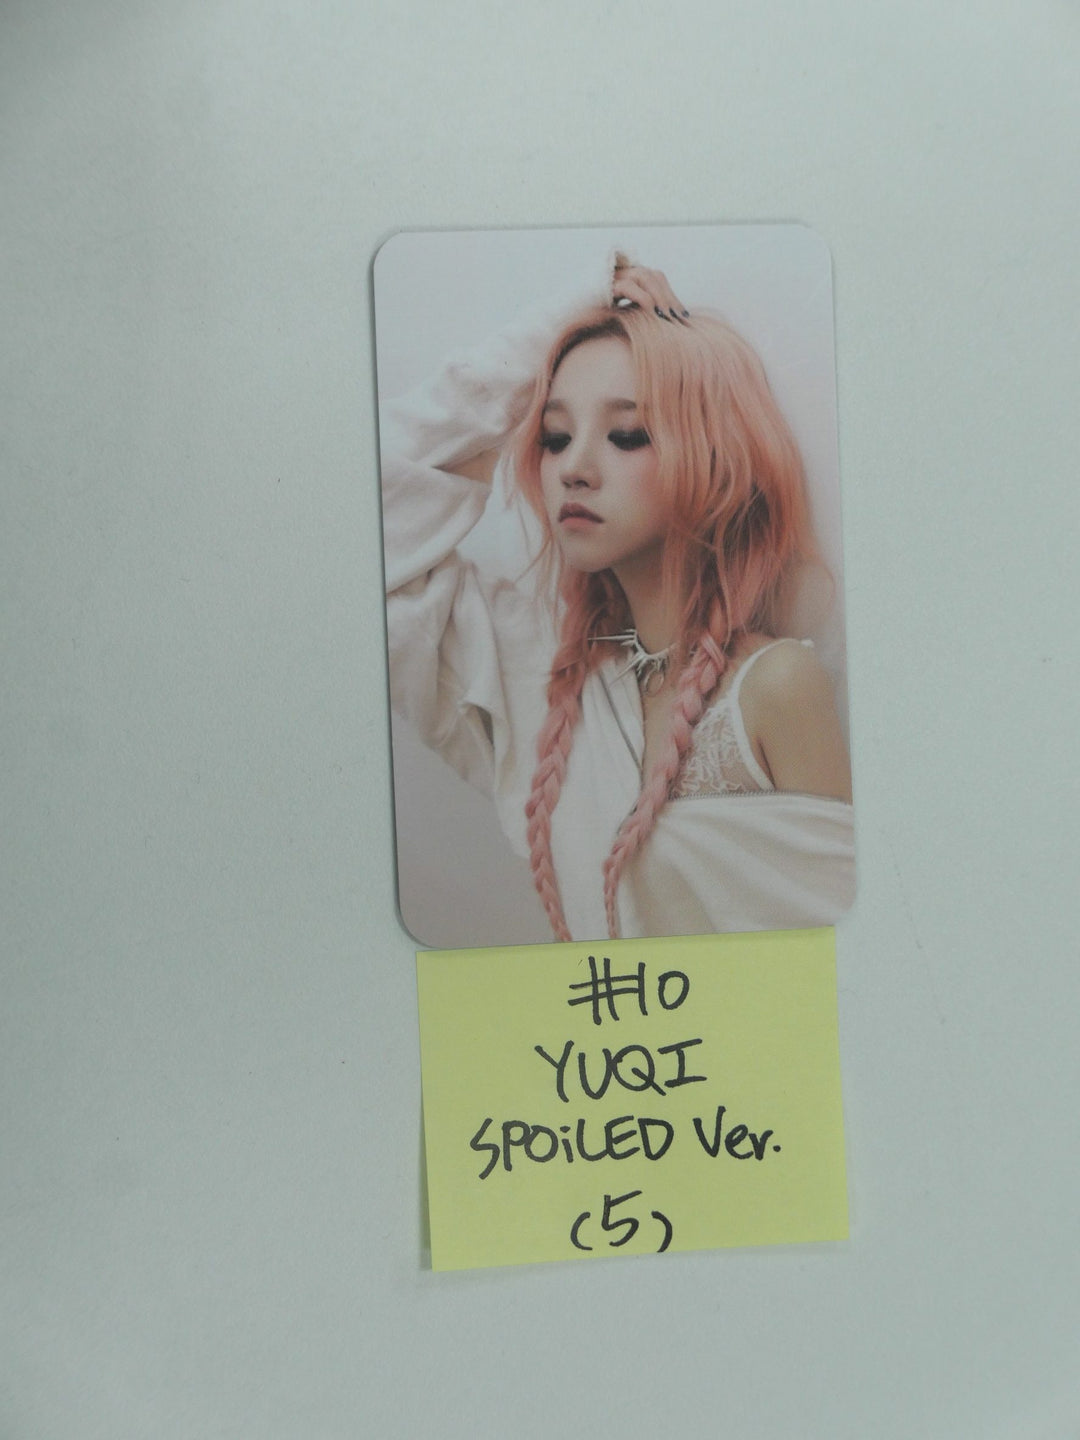 (g) I-DLE "I NEVER DIE" - Official Photocard (Restocked 3/18)